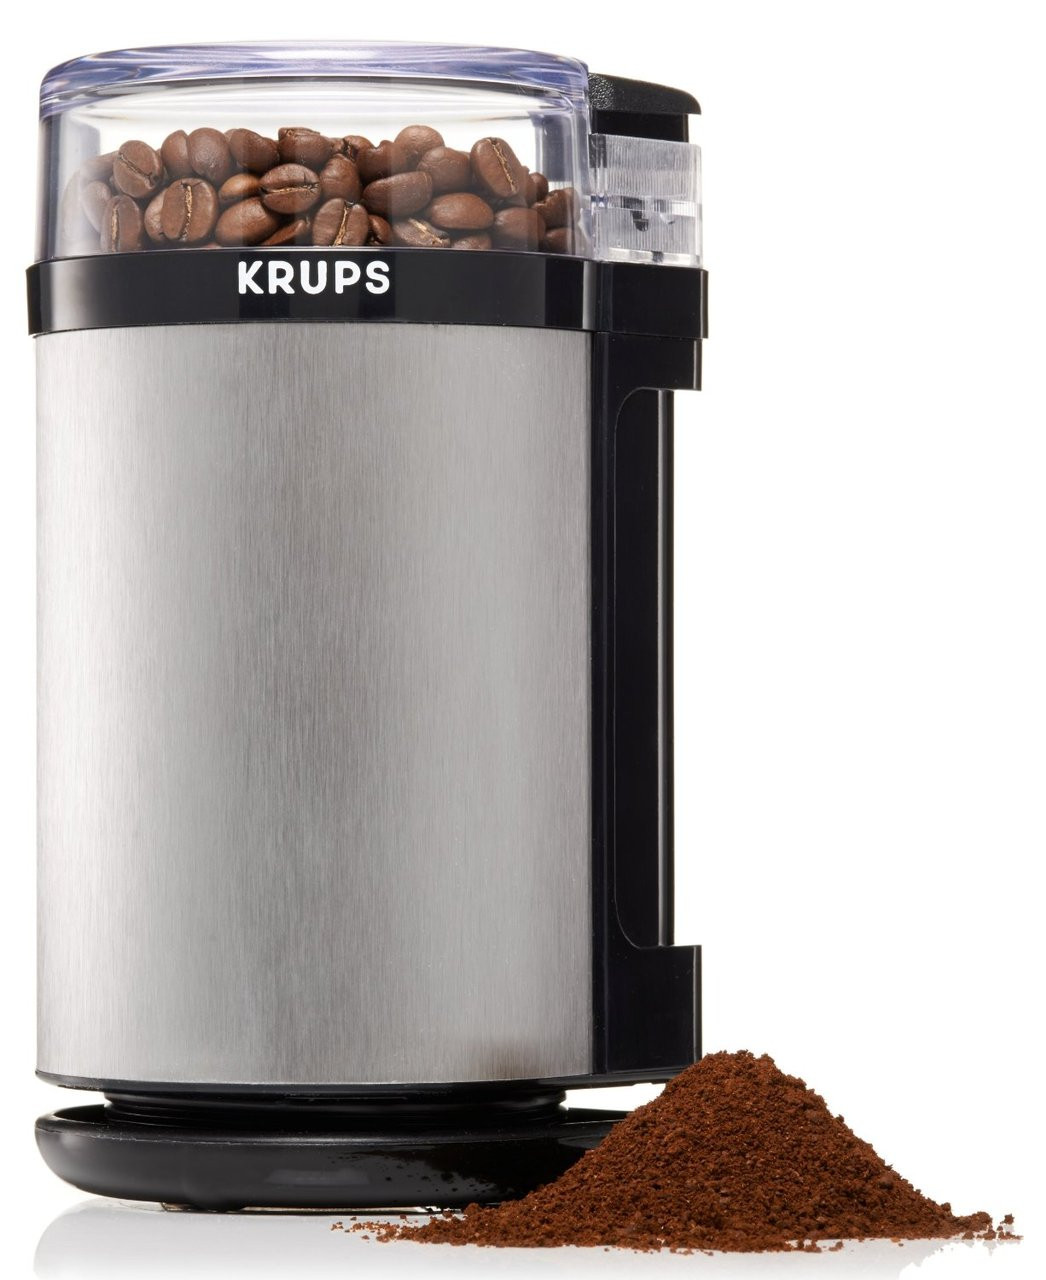 Electric Coffee Grinder and Spice Grinder with 2 Stainless Steel